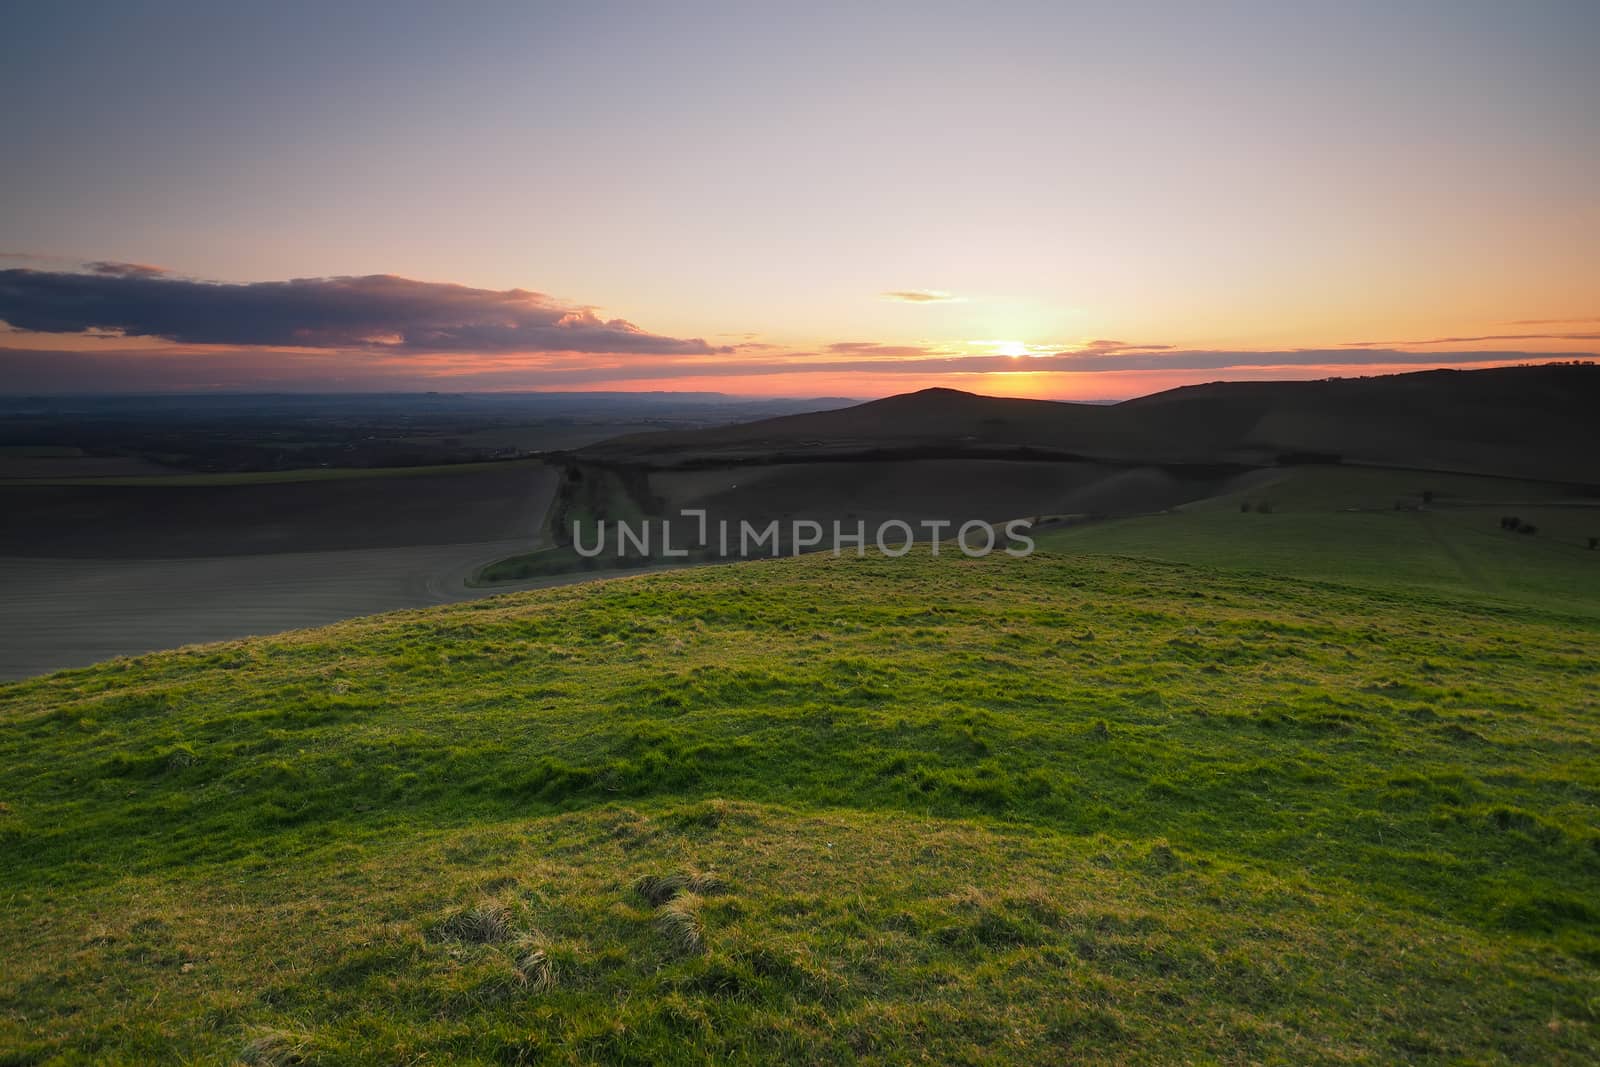 Sunset from the top of Knap Hill looking across the Vale of Pewsey and Salisbury Plain, North Wessex Downs, Wiltshire, UK